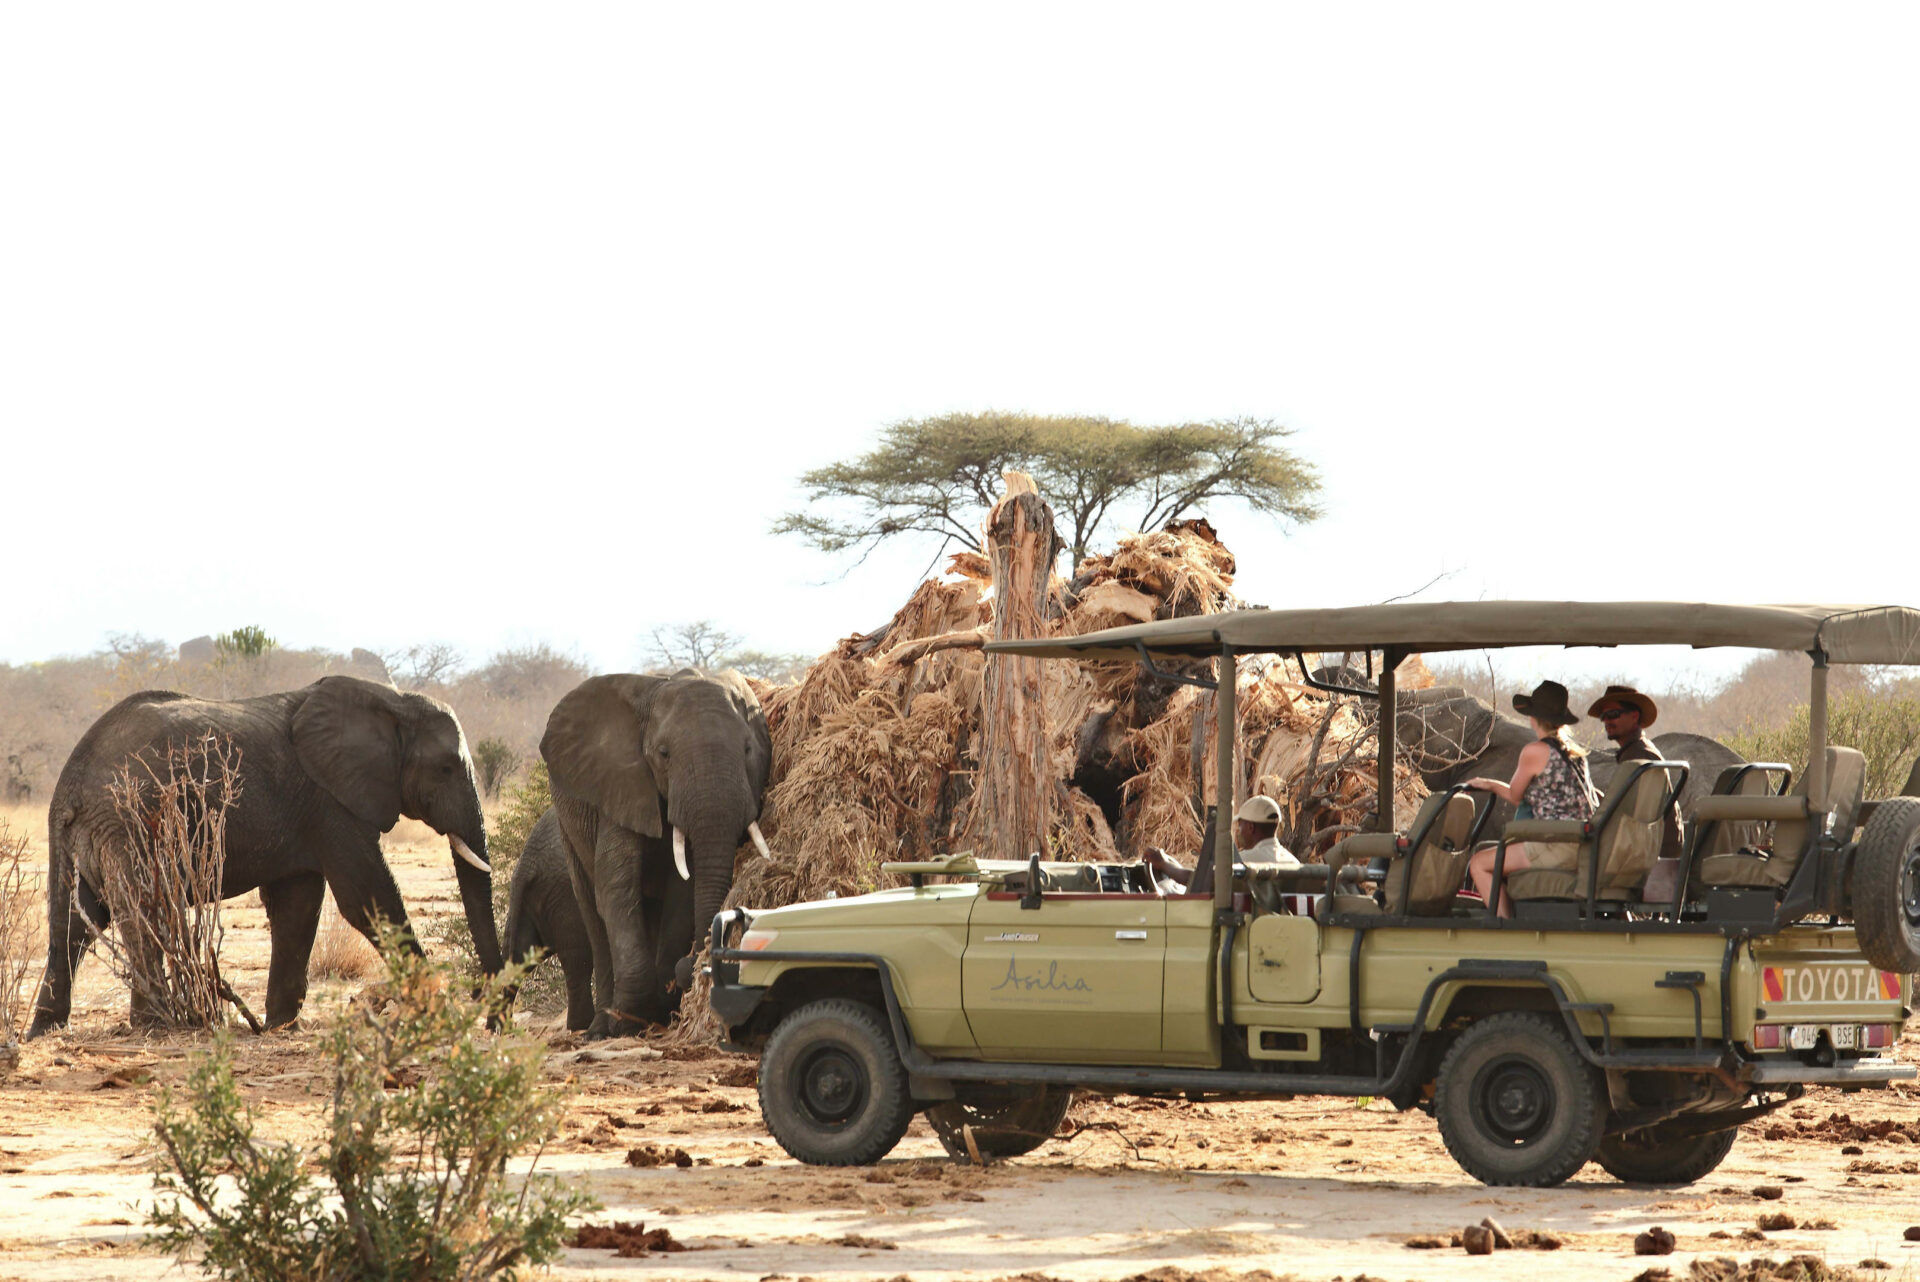 Jabali Private House with guests on a private game drive, with Grand Africa Safaris